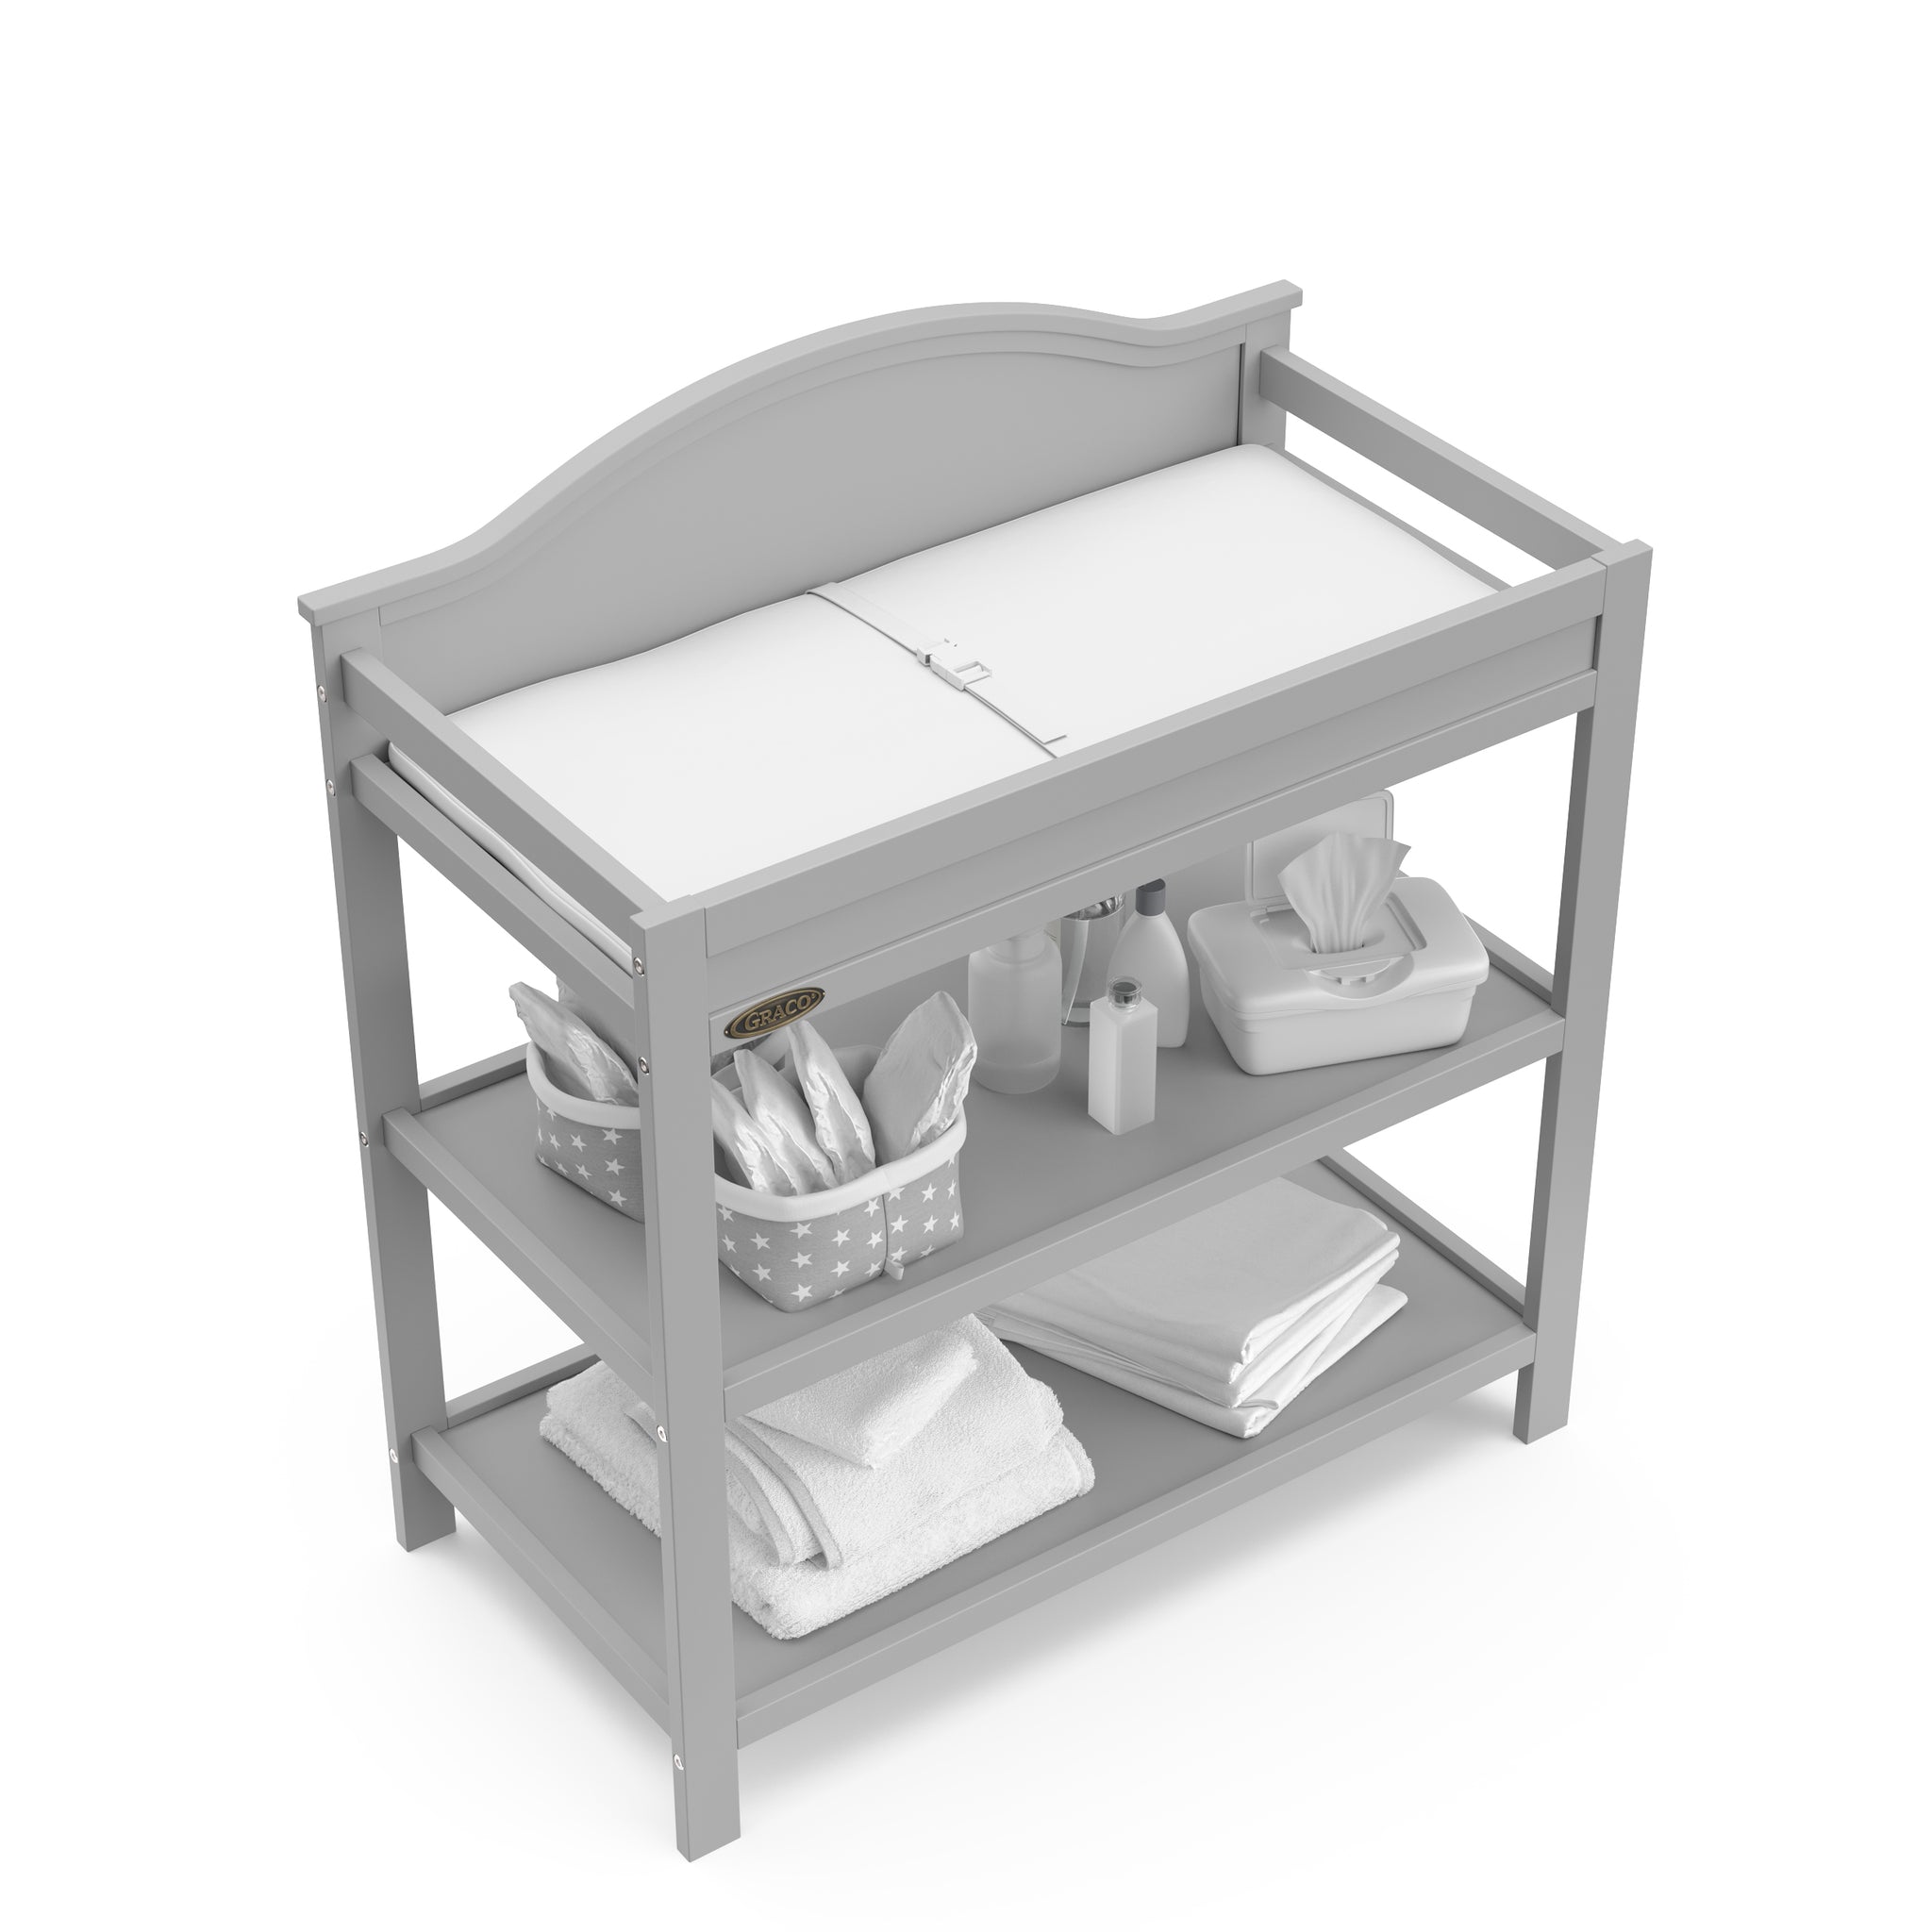 Bird’s-eye view of pebble gray changing table with two open shelves